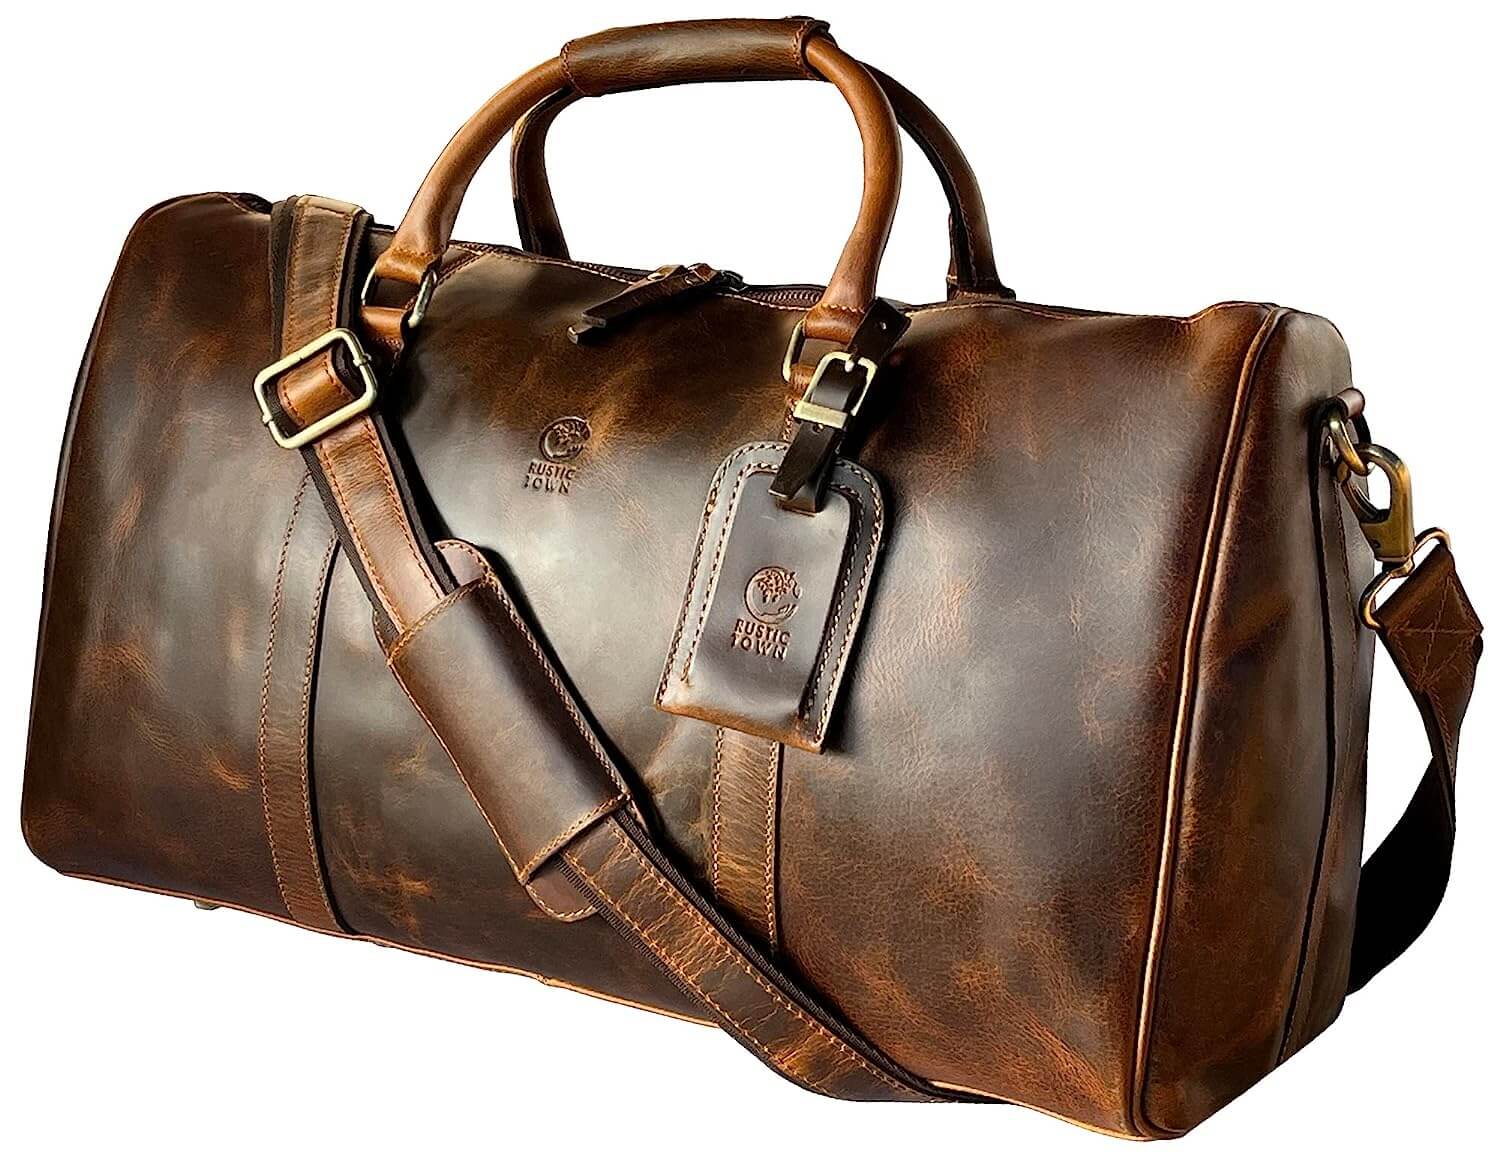 Image of Rustic Town Leather Travel Duffle Bag - The Classic Leather Duffel